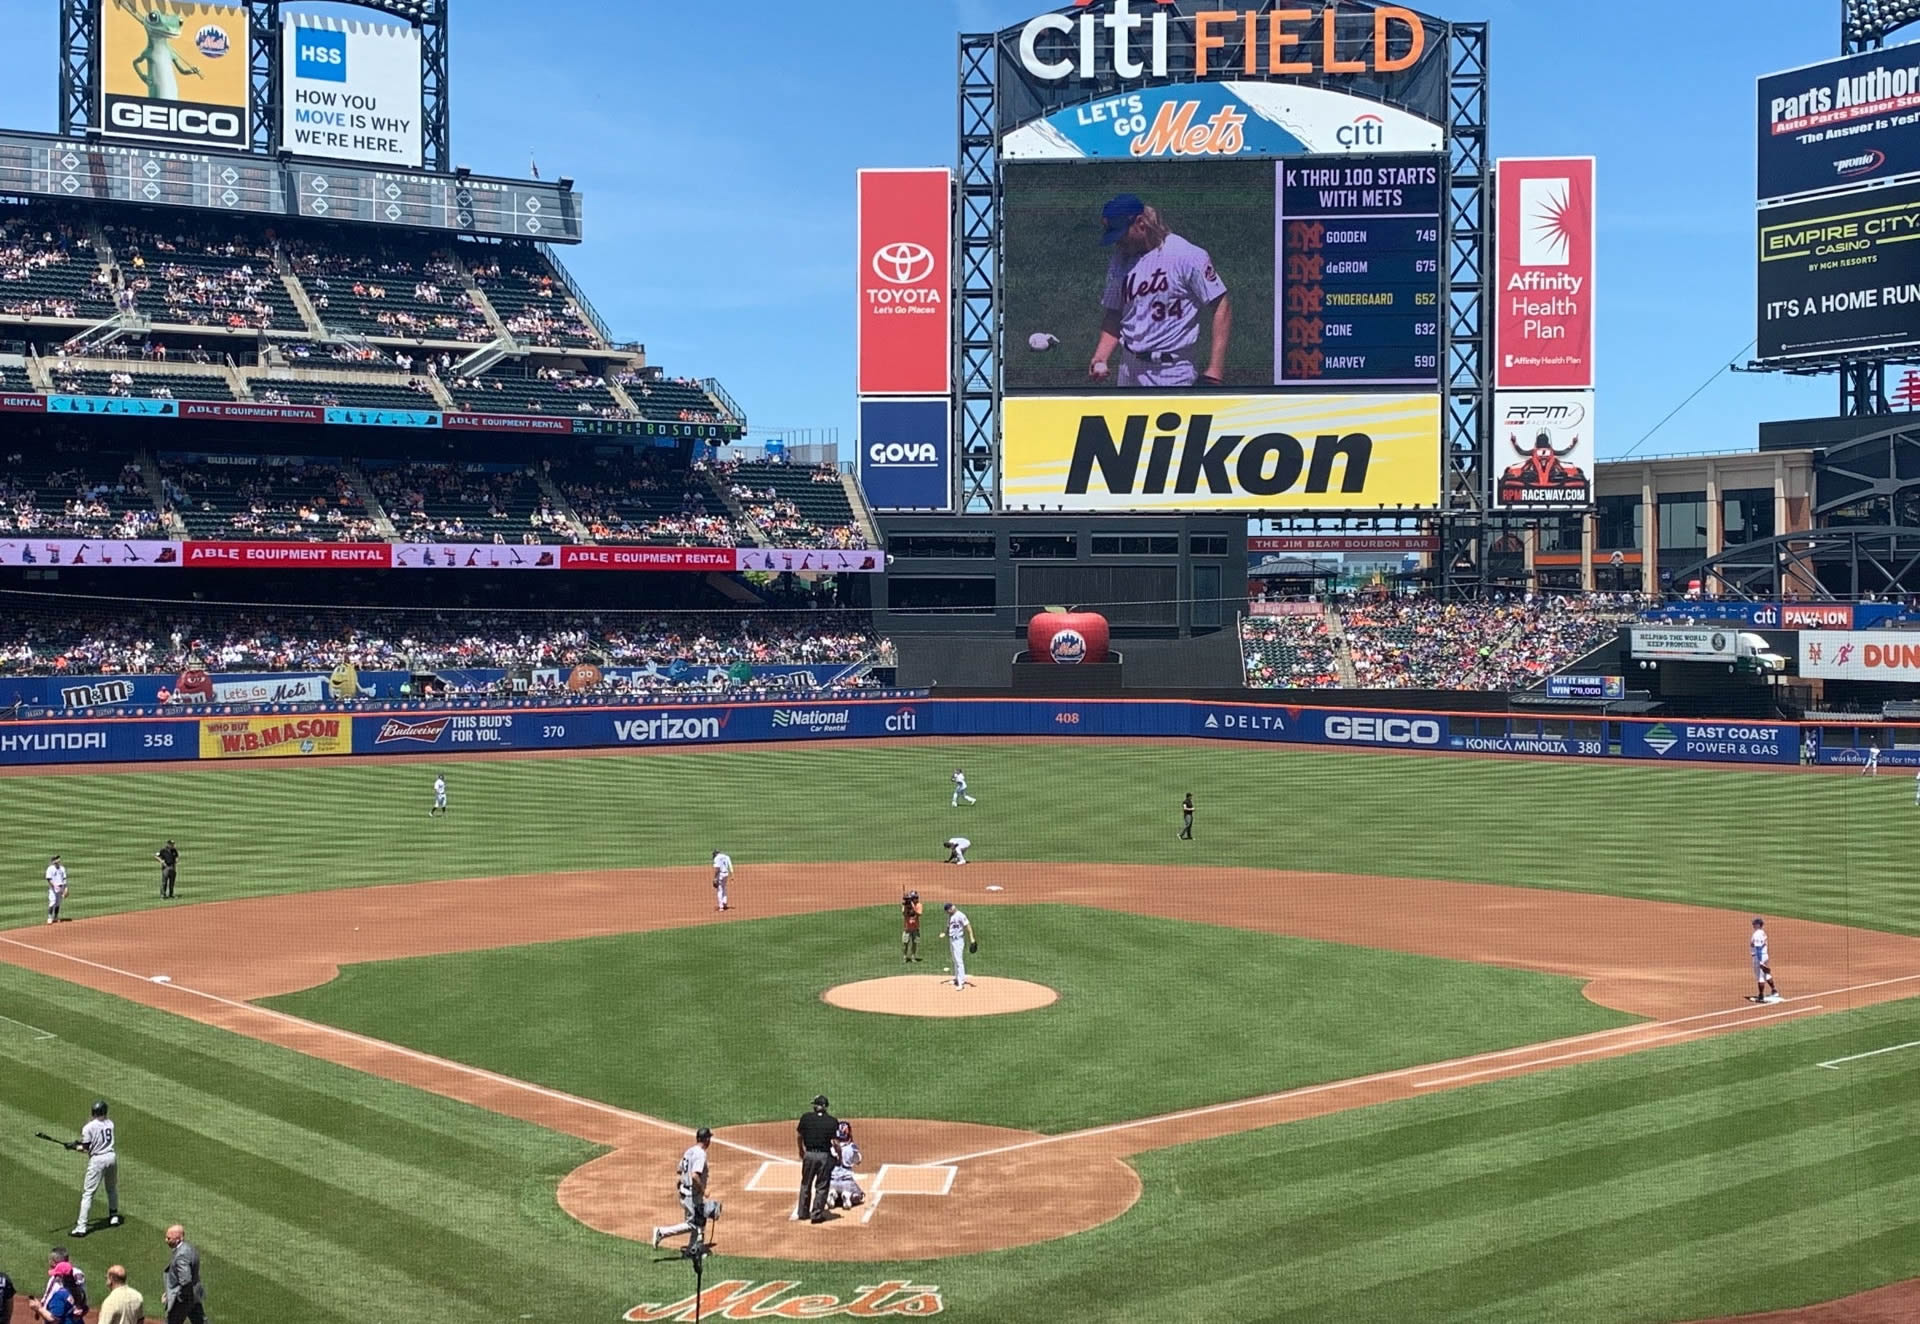 section 117 seat view  - citi field